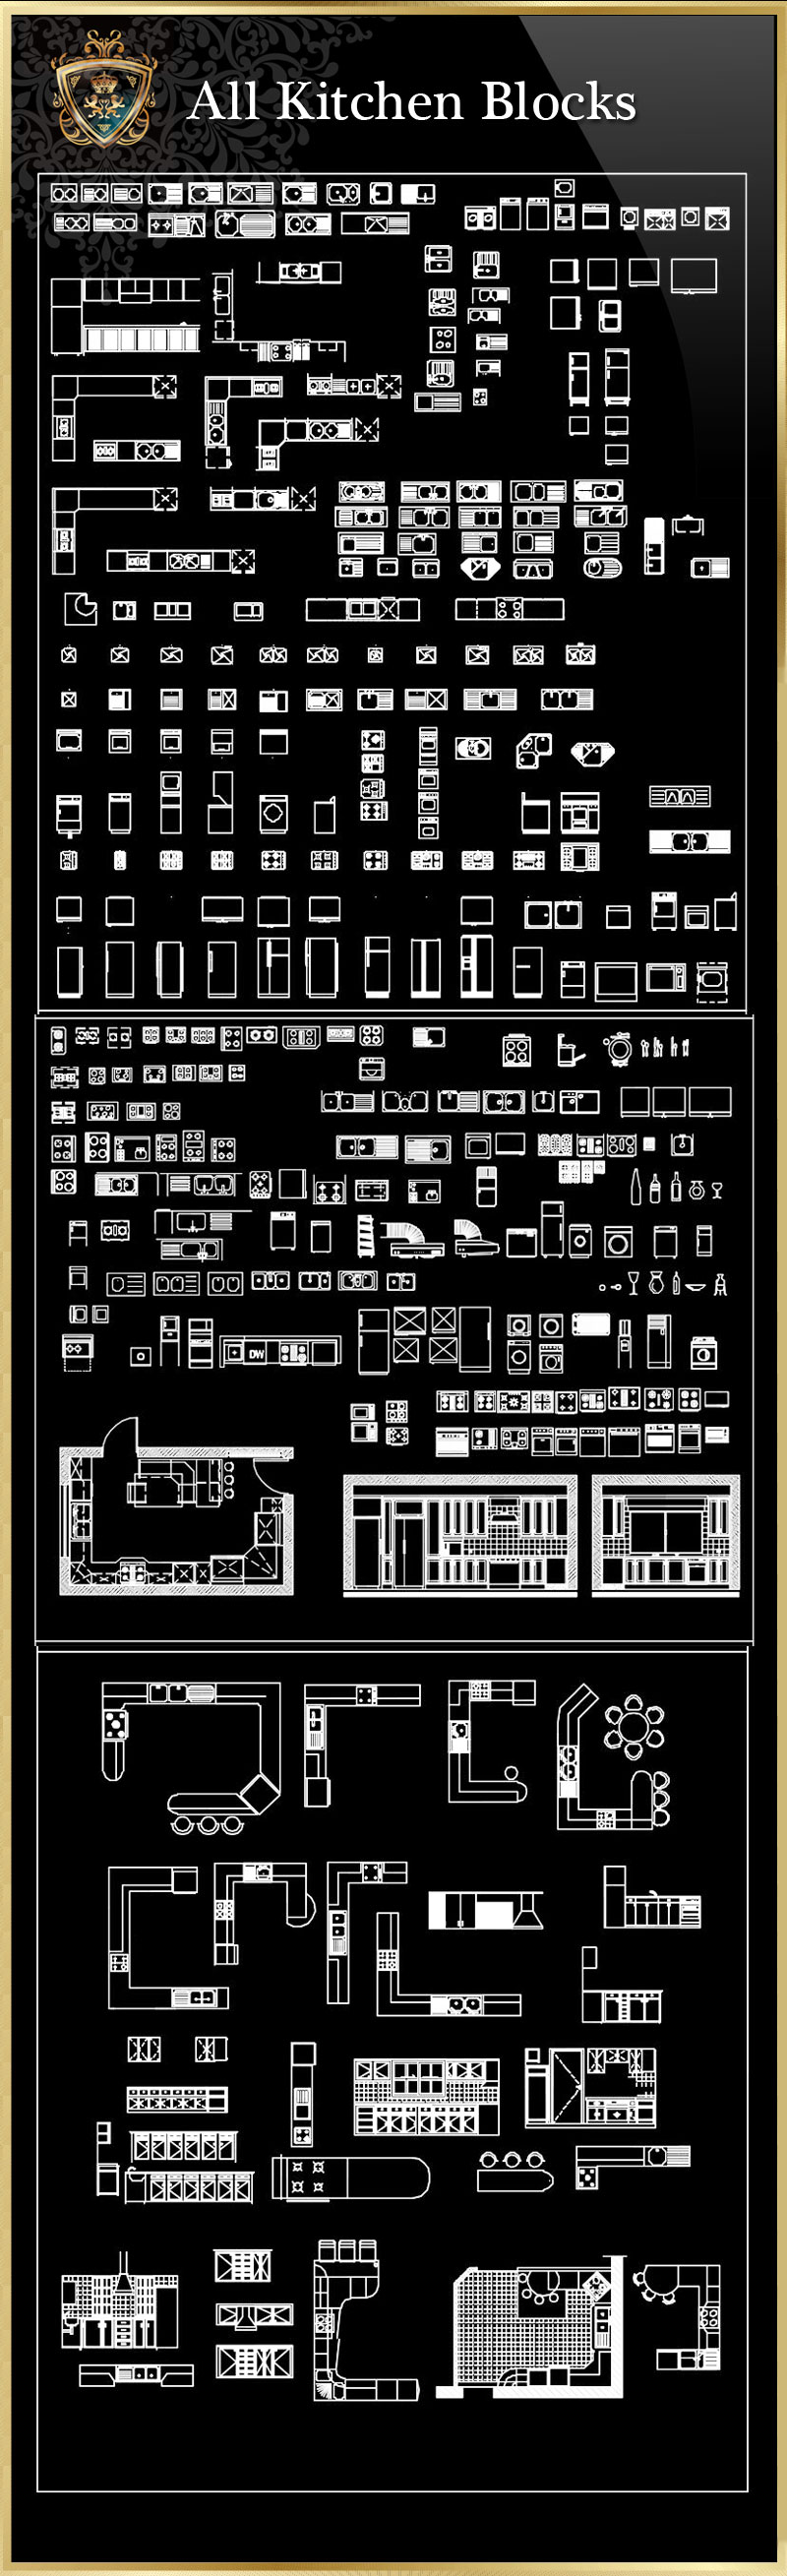 ★【All Kitchen Blocks】Download Luxury Architectural Design CAD Drawings--Over 20000+ High quality CAD Blocks and Drawings Download!